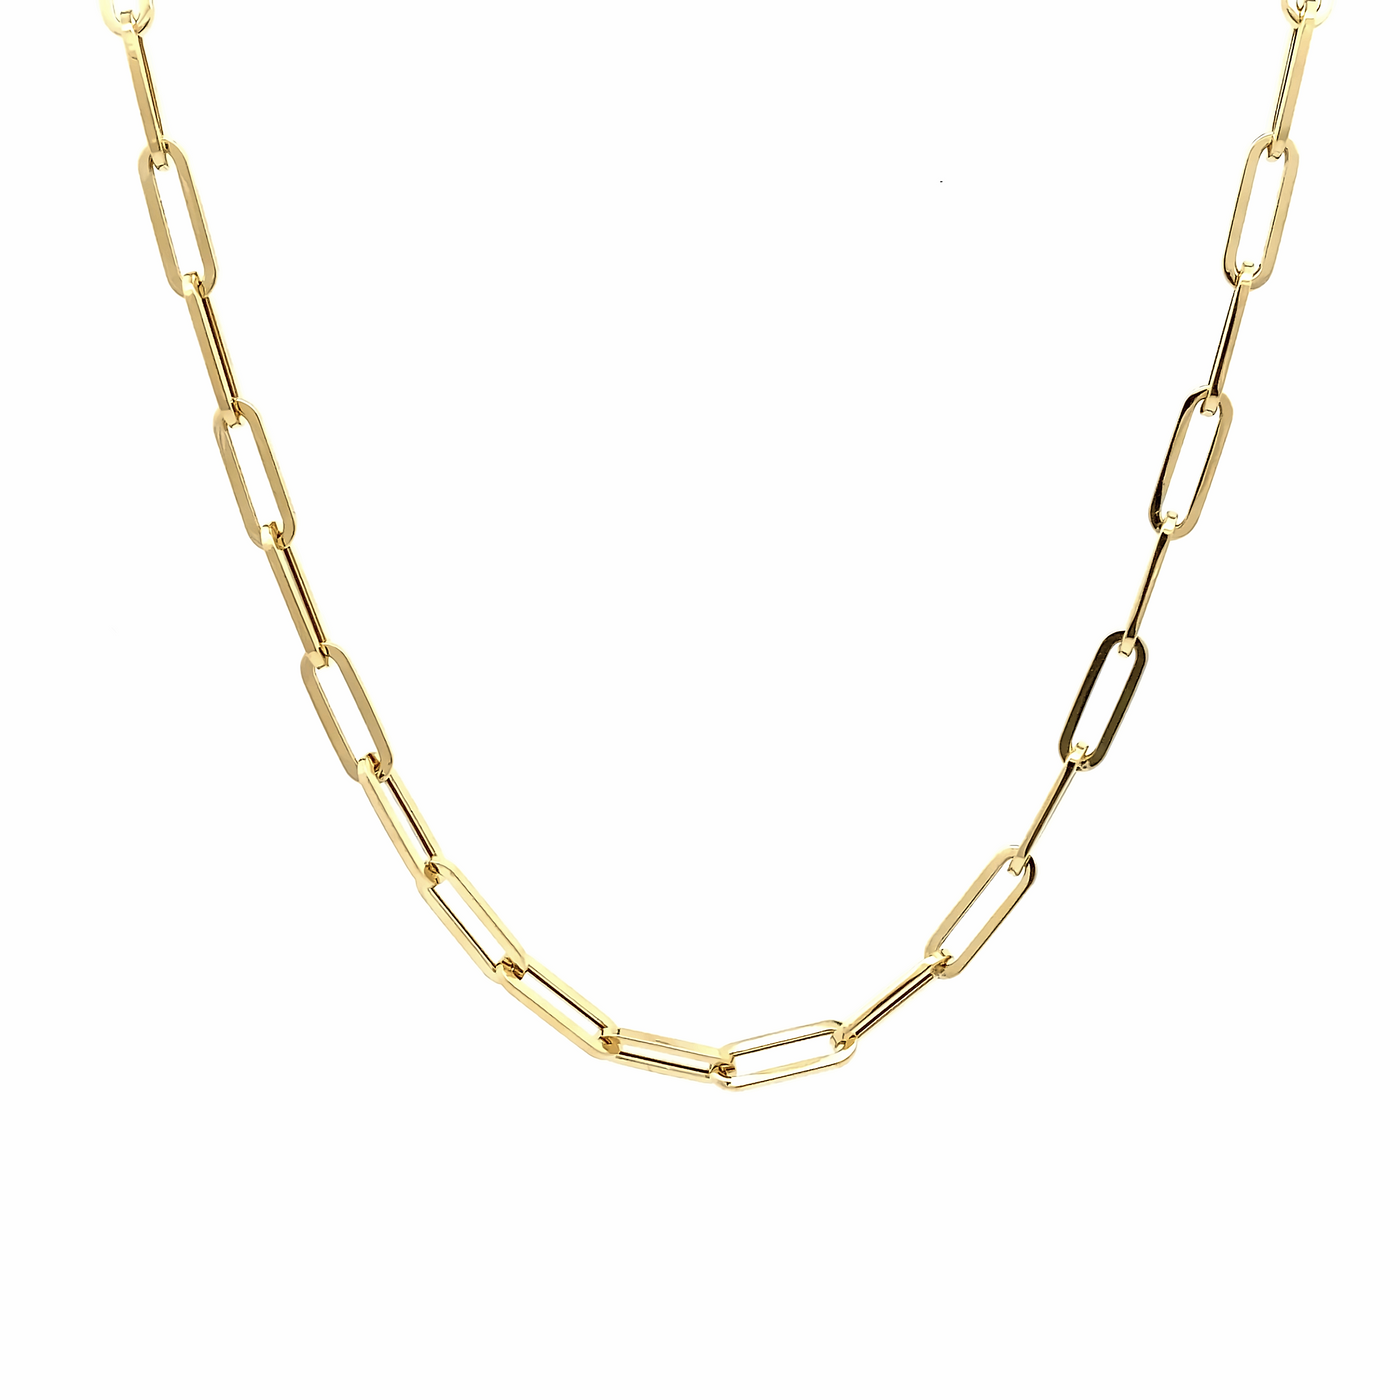 10 Karat Yellow Gold Paperclip Necklace